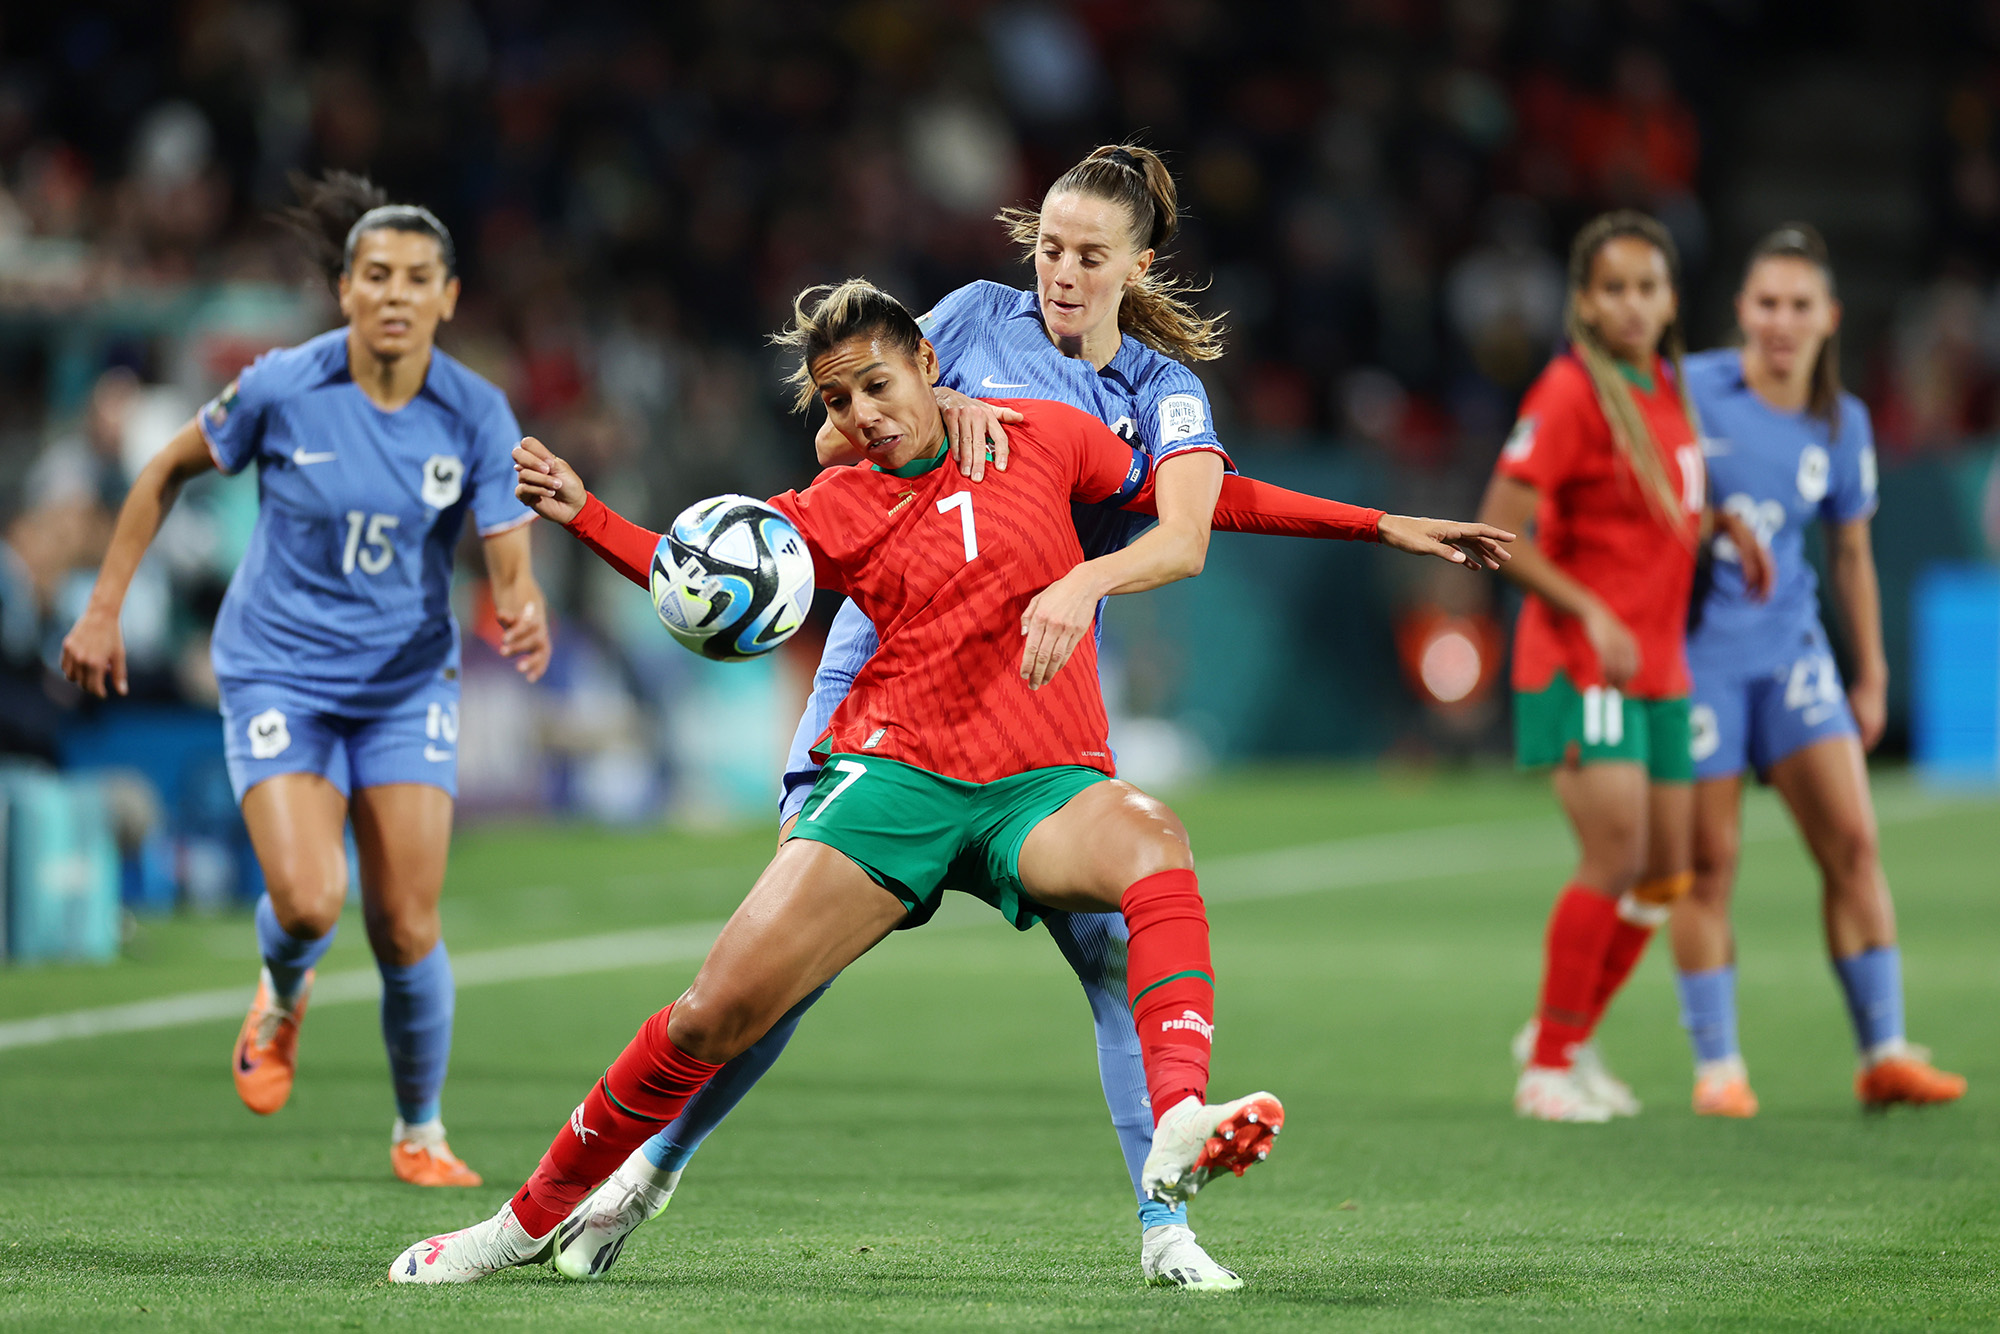 Morocco's Ghizlane Chebbak and Sandie Toletti of France compete for the ball during their Round of 16 match at Hindmarsh Stadium on August 8 in Adelaide, Australia.